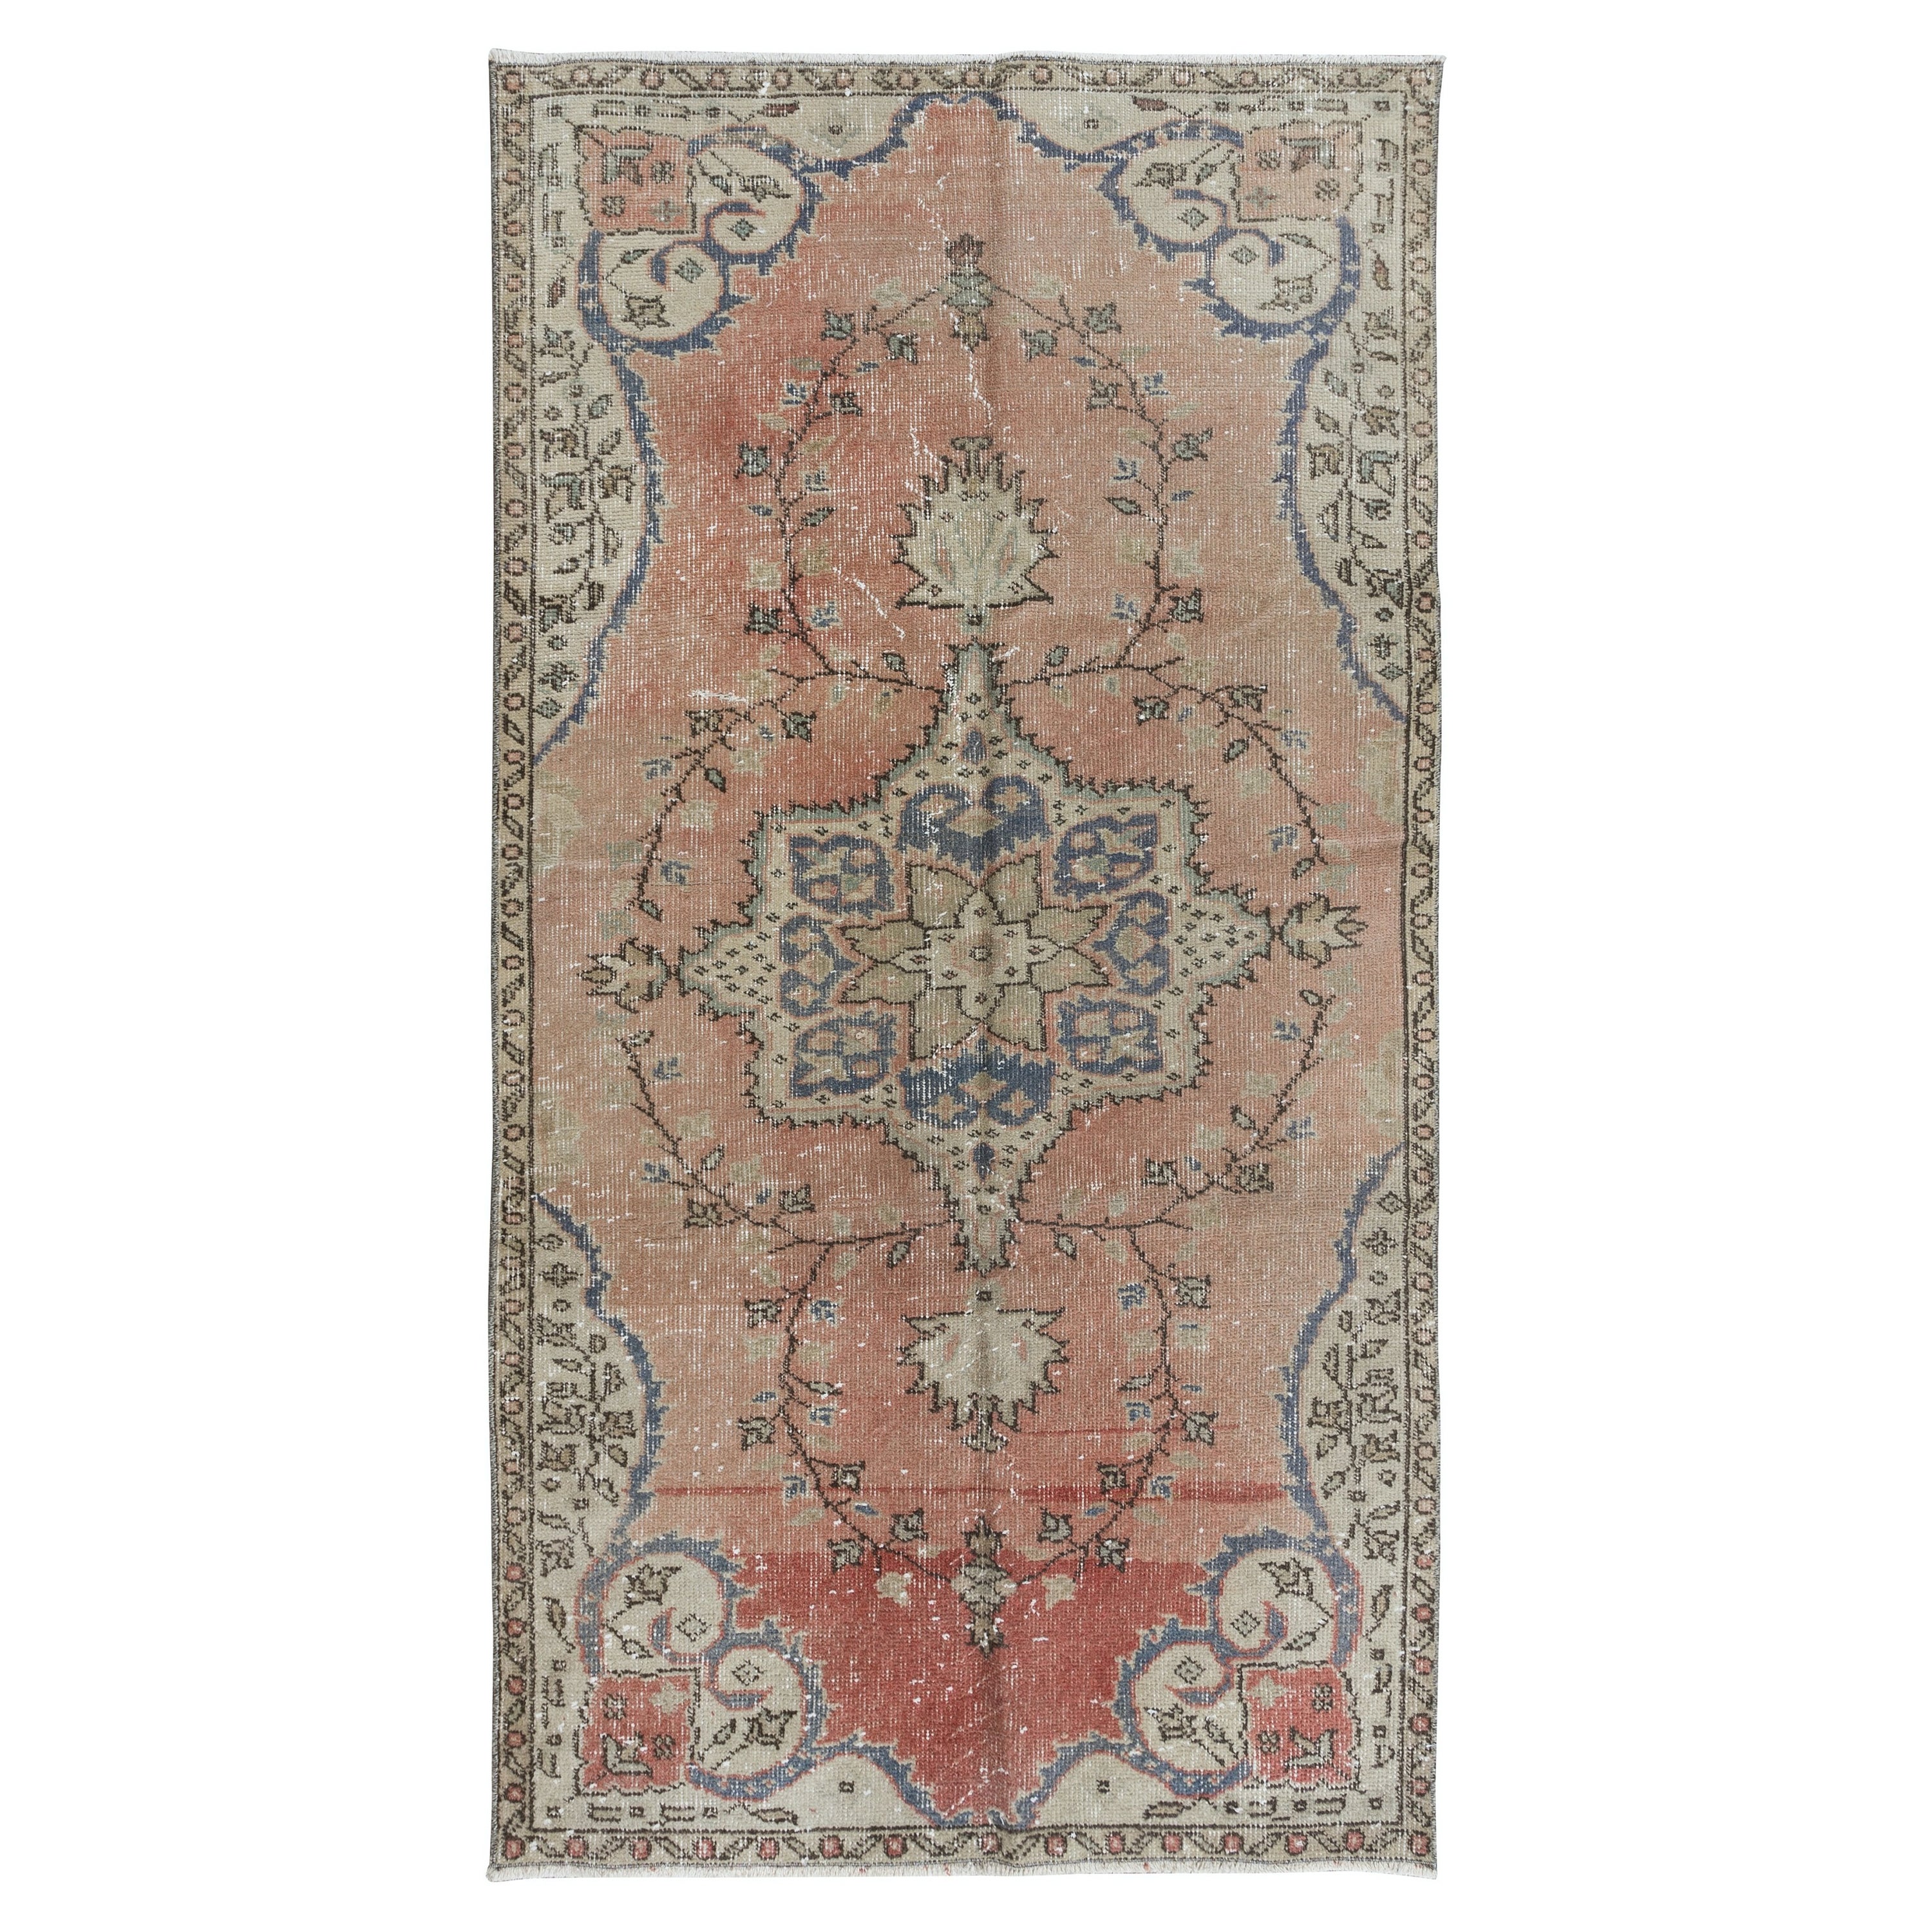 3.5x6.4 Ft Hand Knotted Vintage Turkish Rug in Soft Red, Beige & Navy Blue